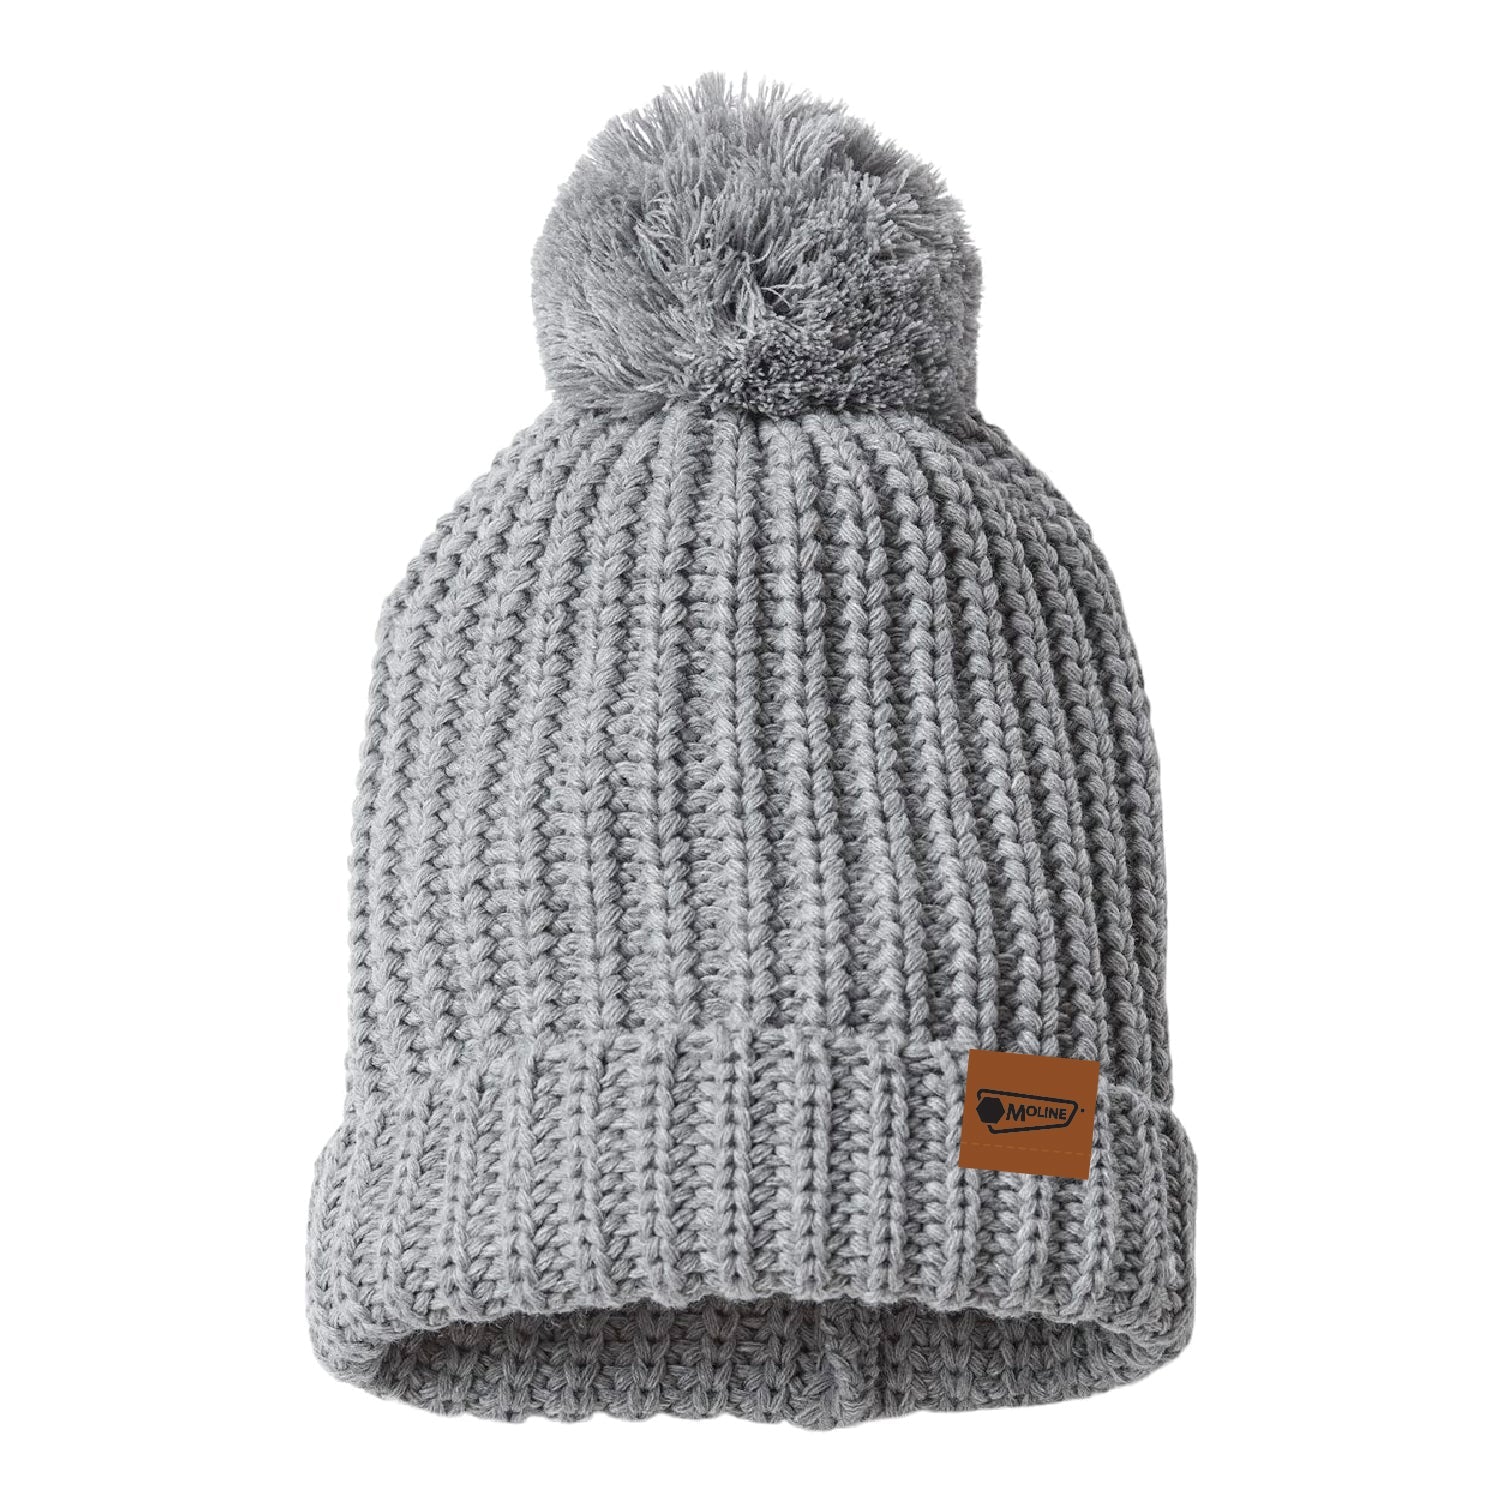 Moline Chunky Cable with Cuff & Pom Beanie - DSP On Demand